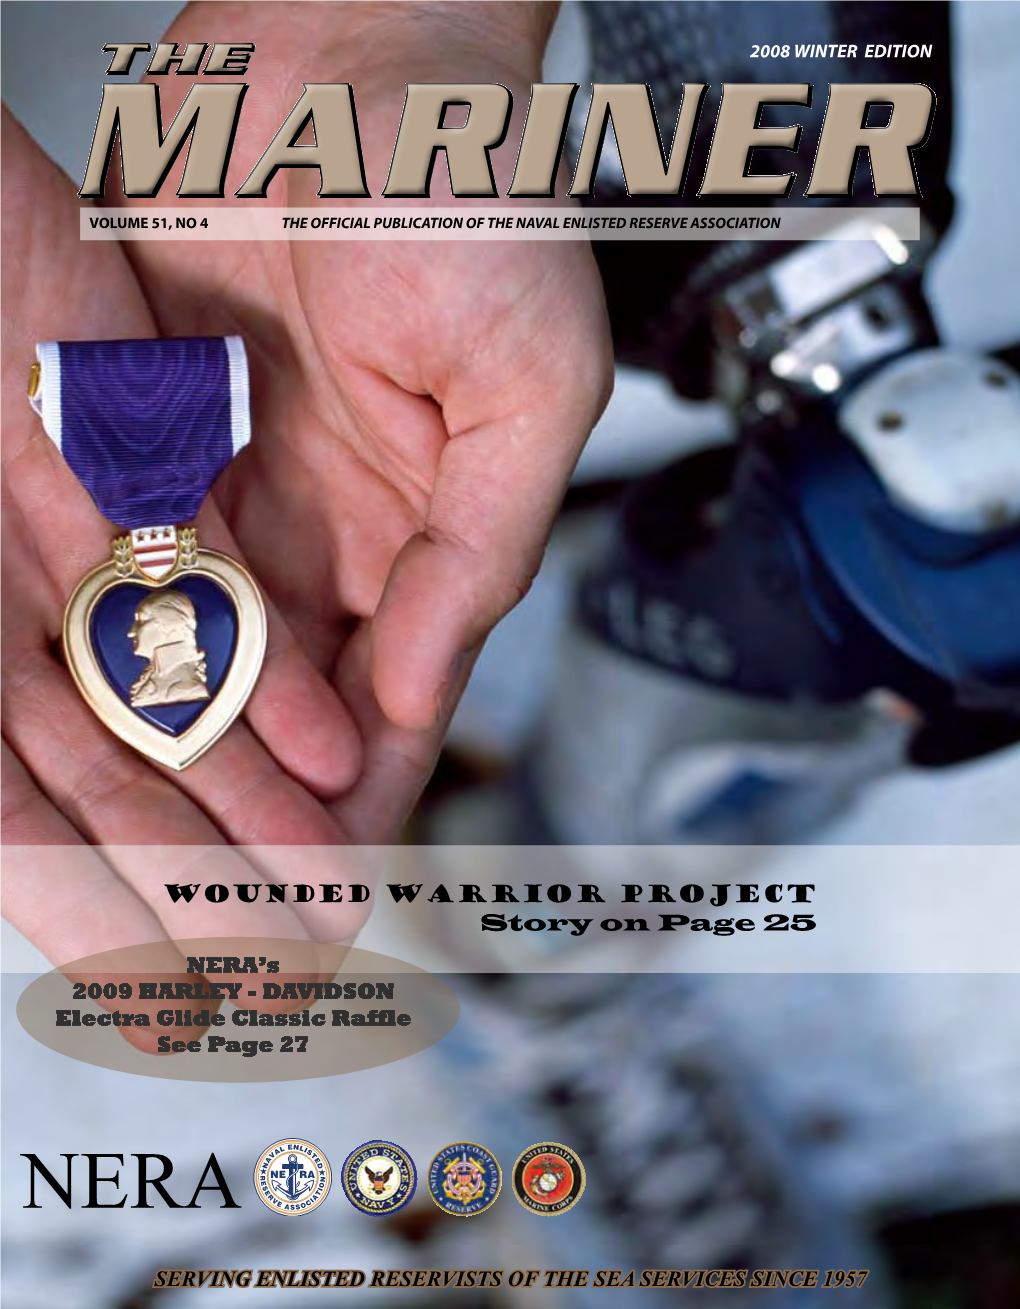 Wounded Warrior Project Story on Page 25